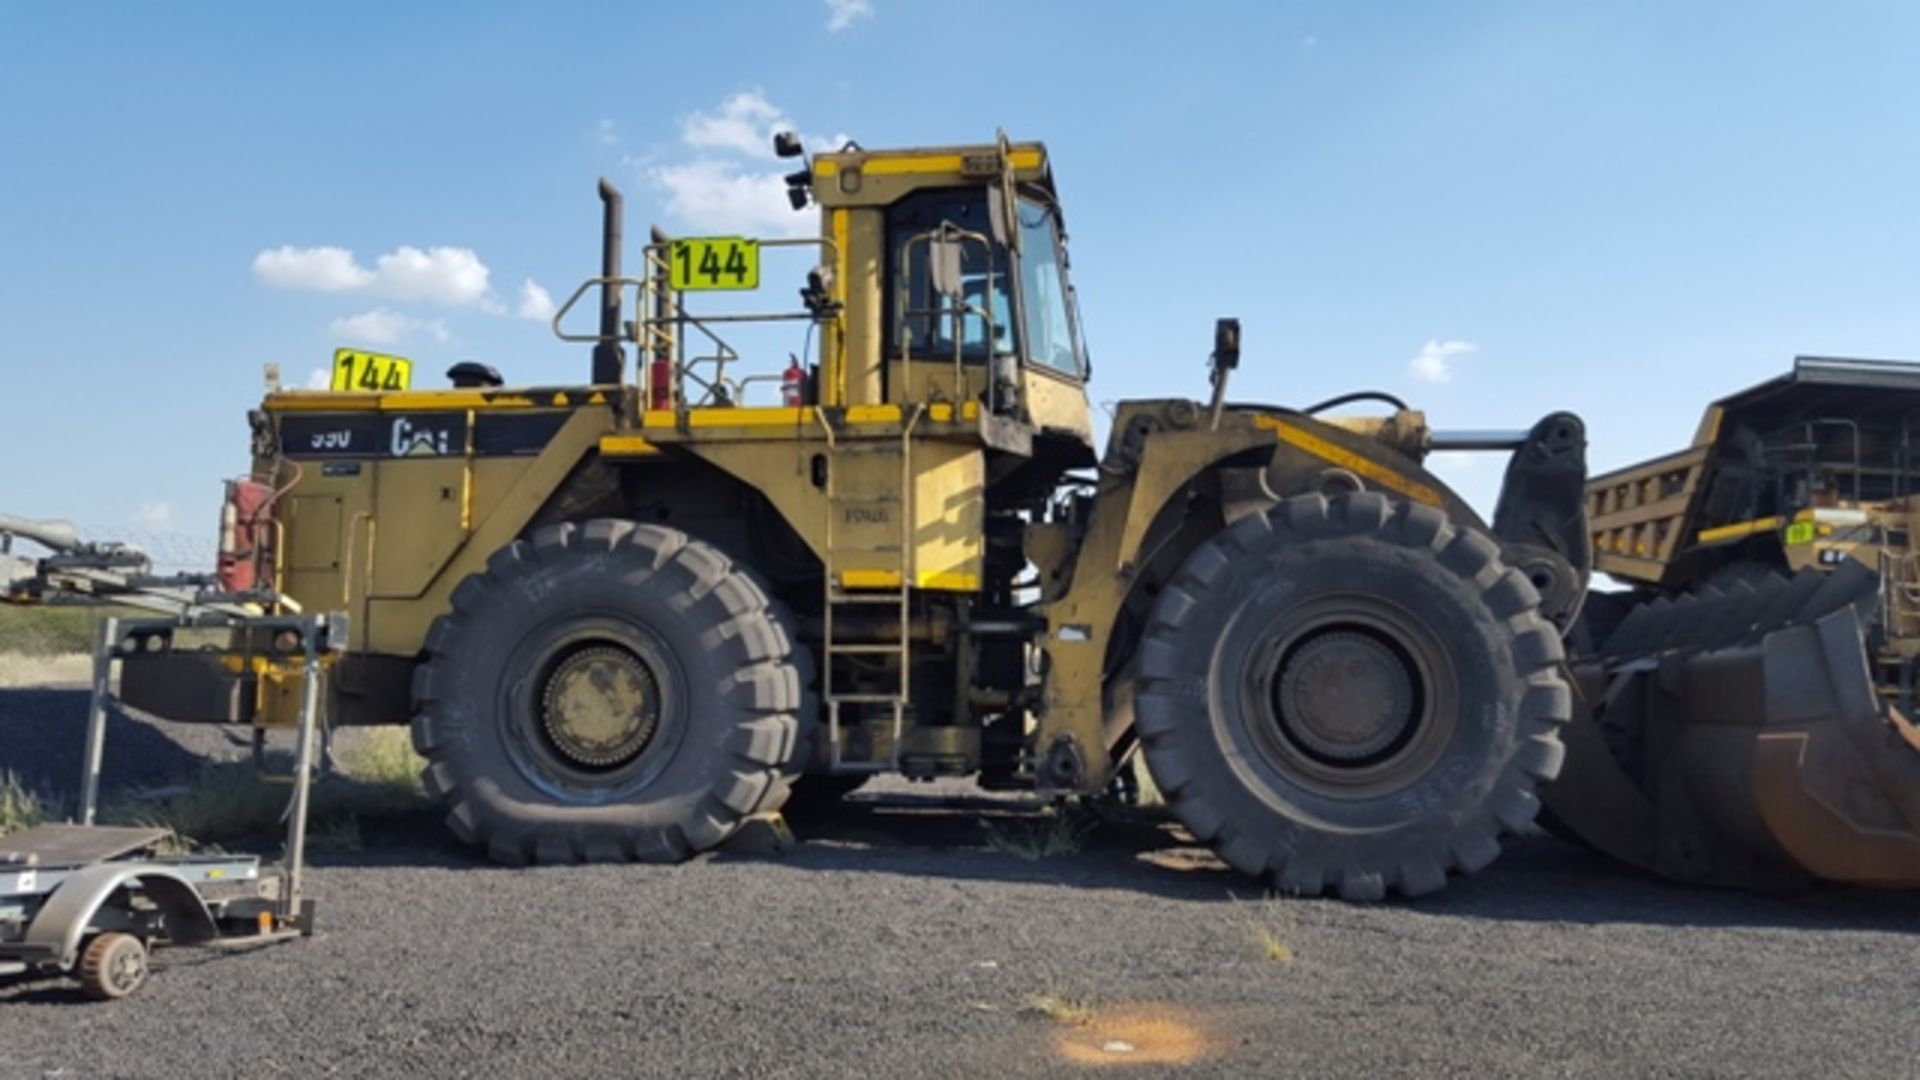 2007 CAT FRONT END LOADER, NON RUNNER (LOCATED IN HOTAZEL, NC) - Image 9 of 10